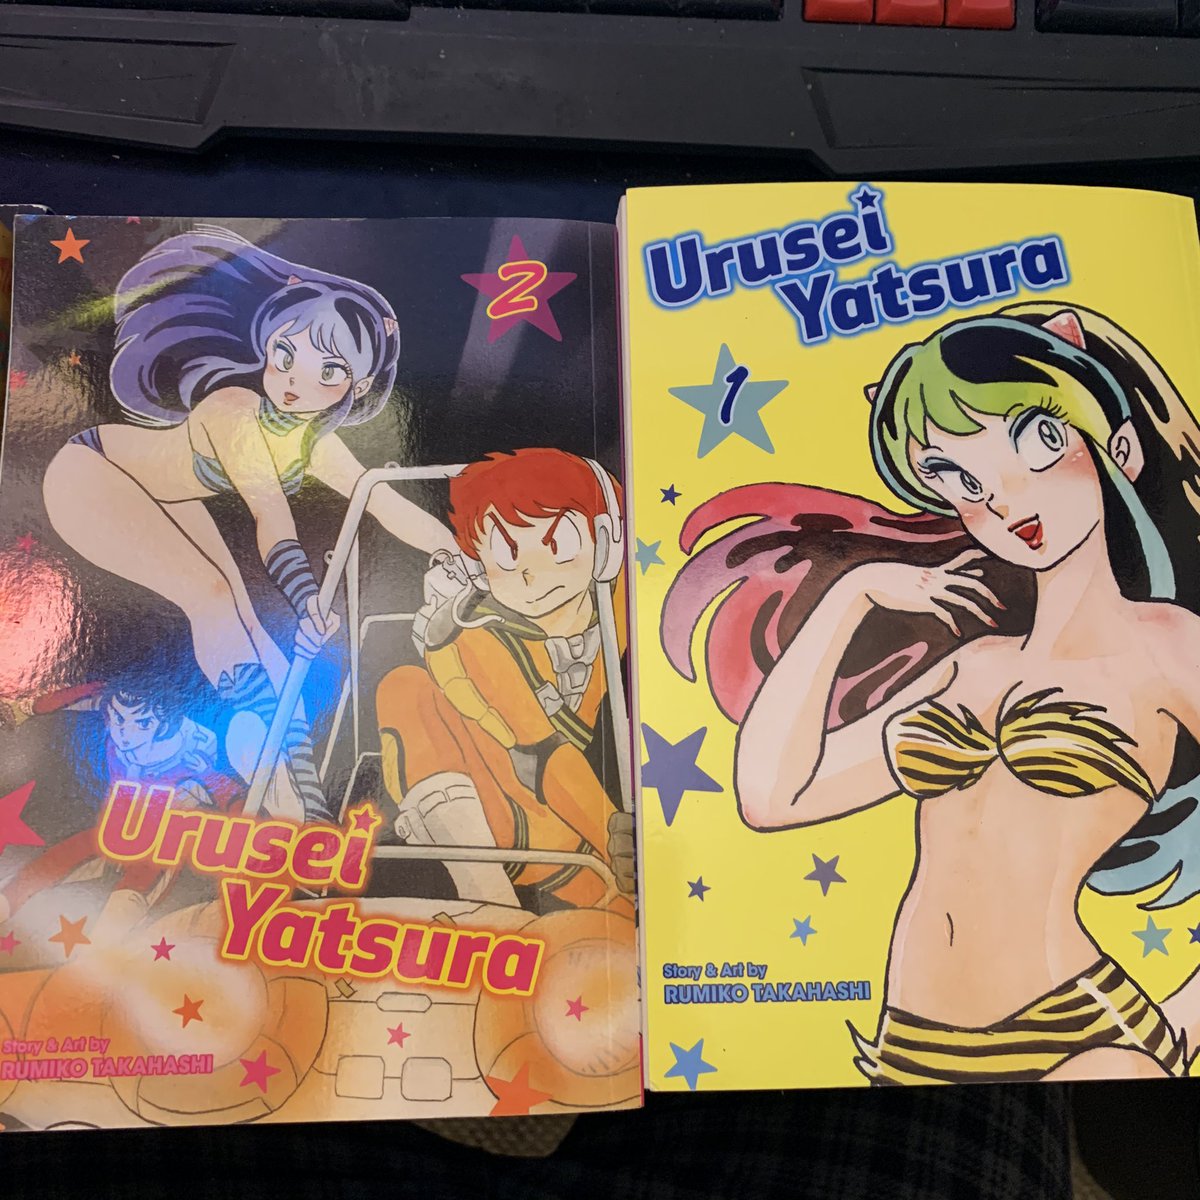 Beautiful Dreamer is the 2nd movie for Urusei Yatsura. It was a created by Rumiko Takahashi and it was first premier work, and a hit! The manga was created in the late 70’s but where only getting proper translations now. They tried before, but it didn’t catch on in the states.